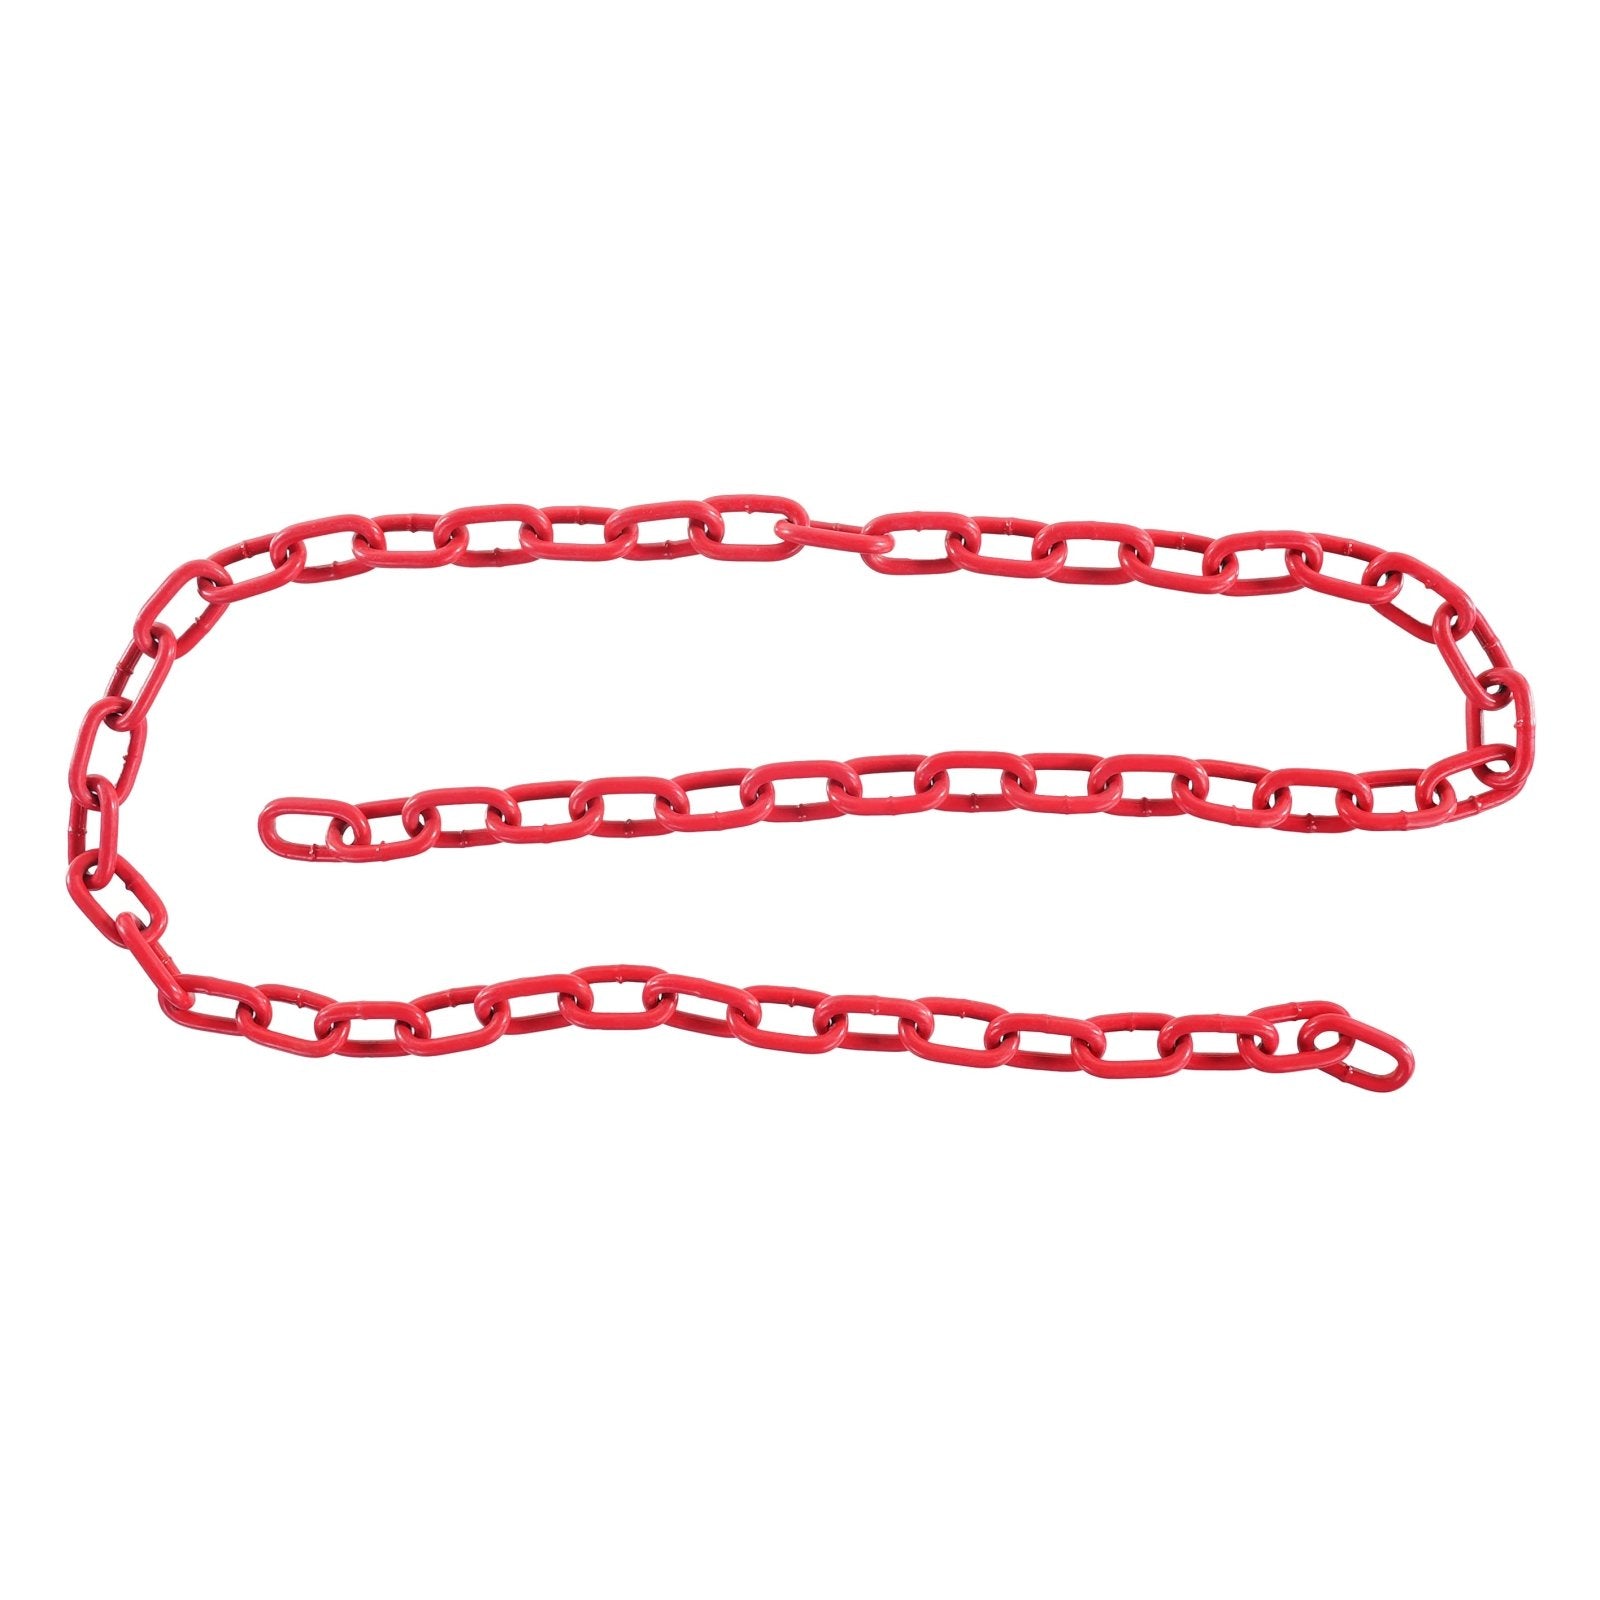 Core By Kink Red Chain - Kink Store